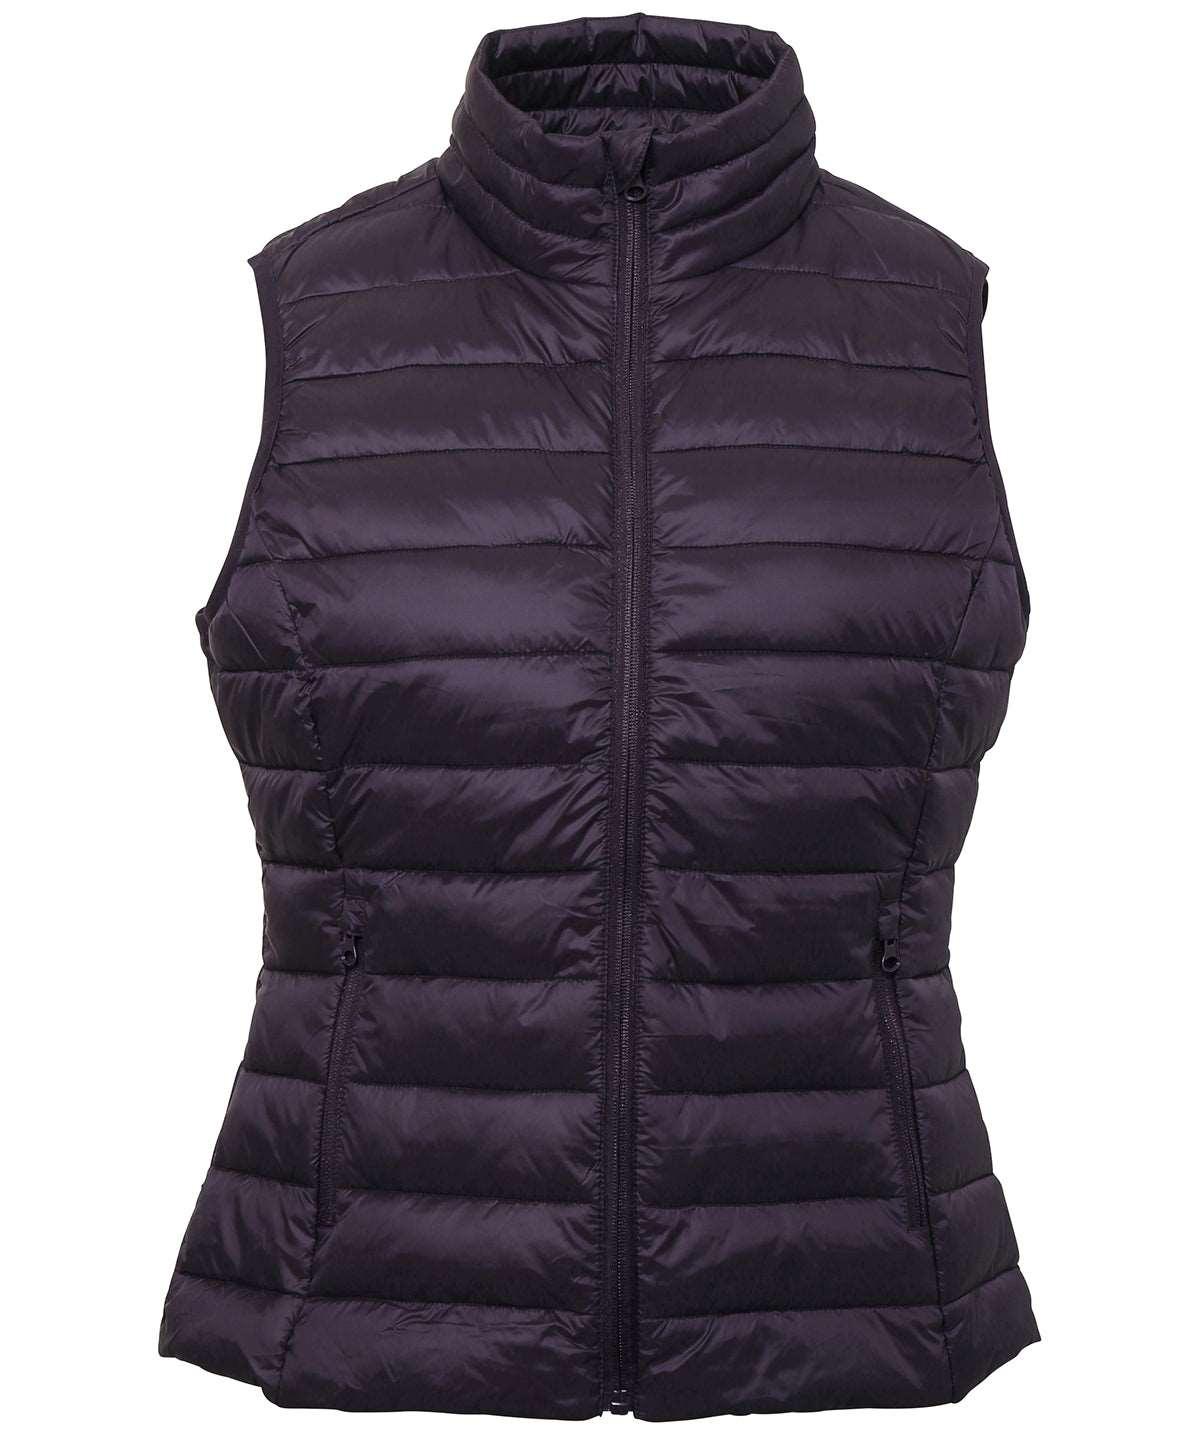 Aubergine - Women's terrain padded gilet Body Warmers 2786 Alfresco Dining, Gilets and Bodywarmers, Jackets & Coats, Must Haves, Outdoor Dining, Padded & Insulation, Women's Fashion Schoolwear Centres